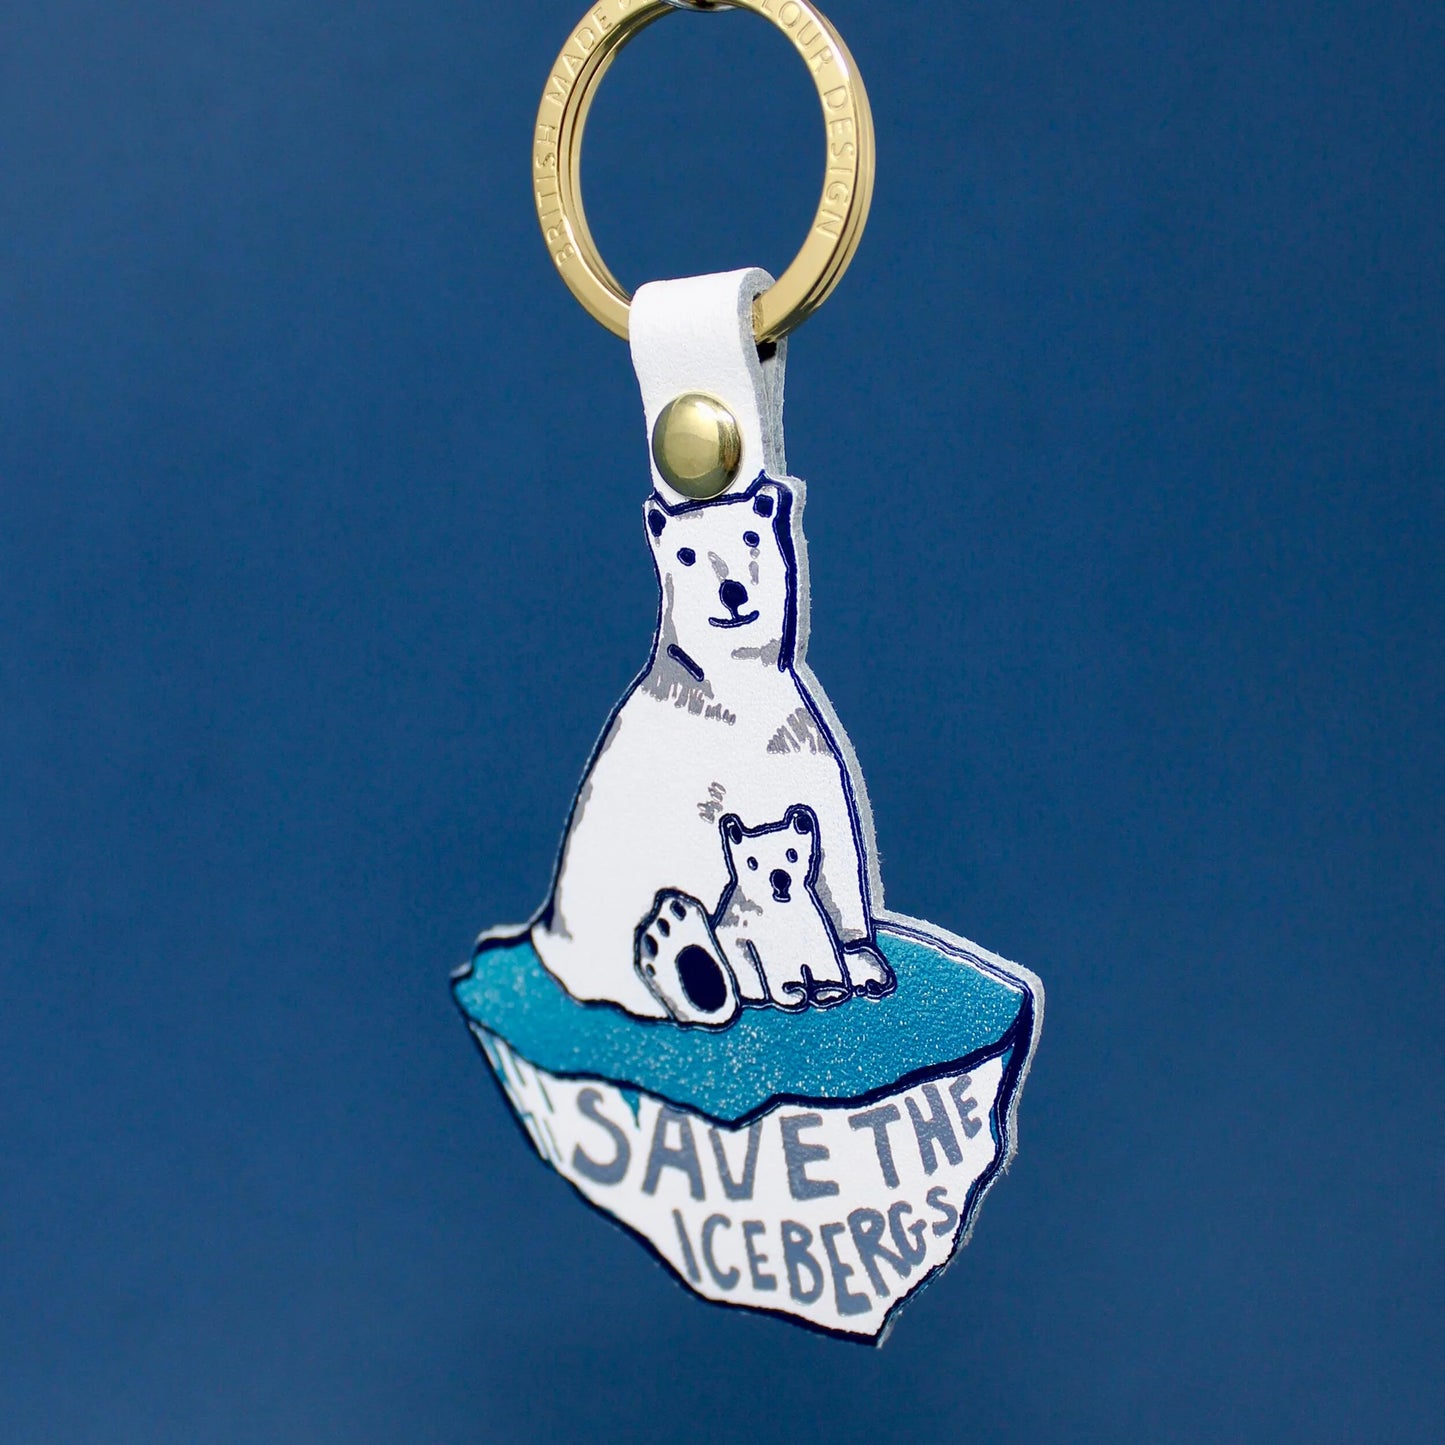 Genuine leather polar bear key fob,with “Save the icebergs” text and completed with gold plated ring.